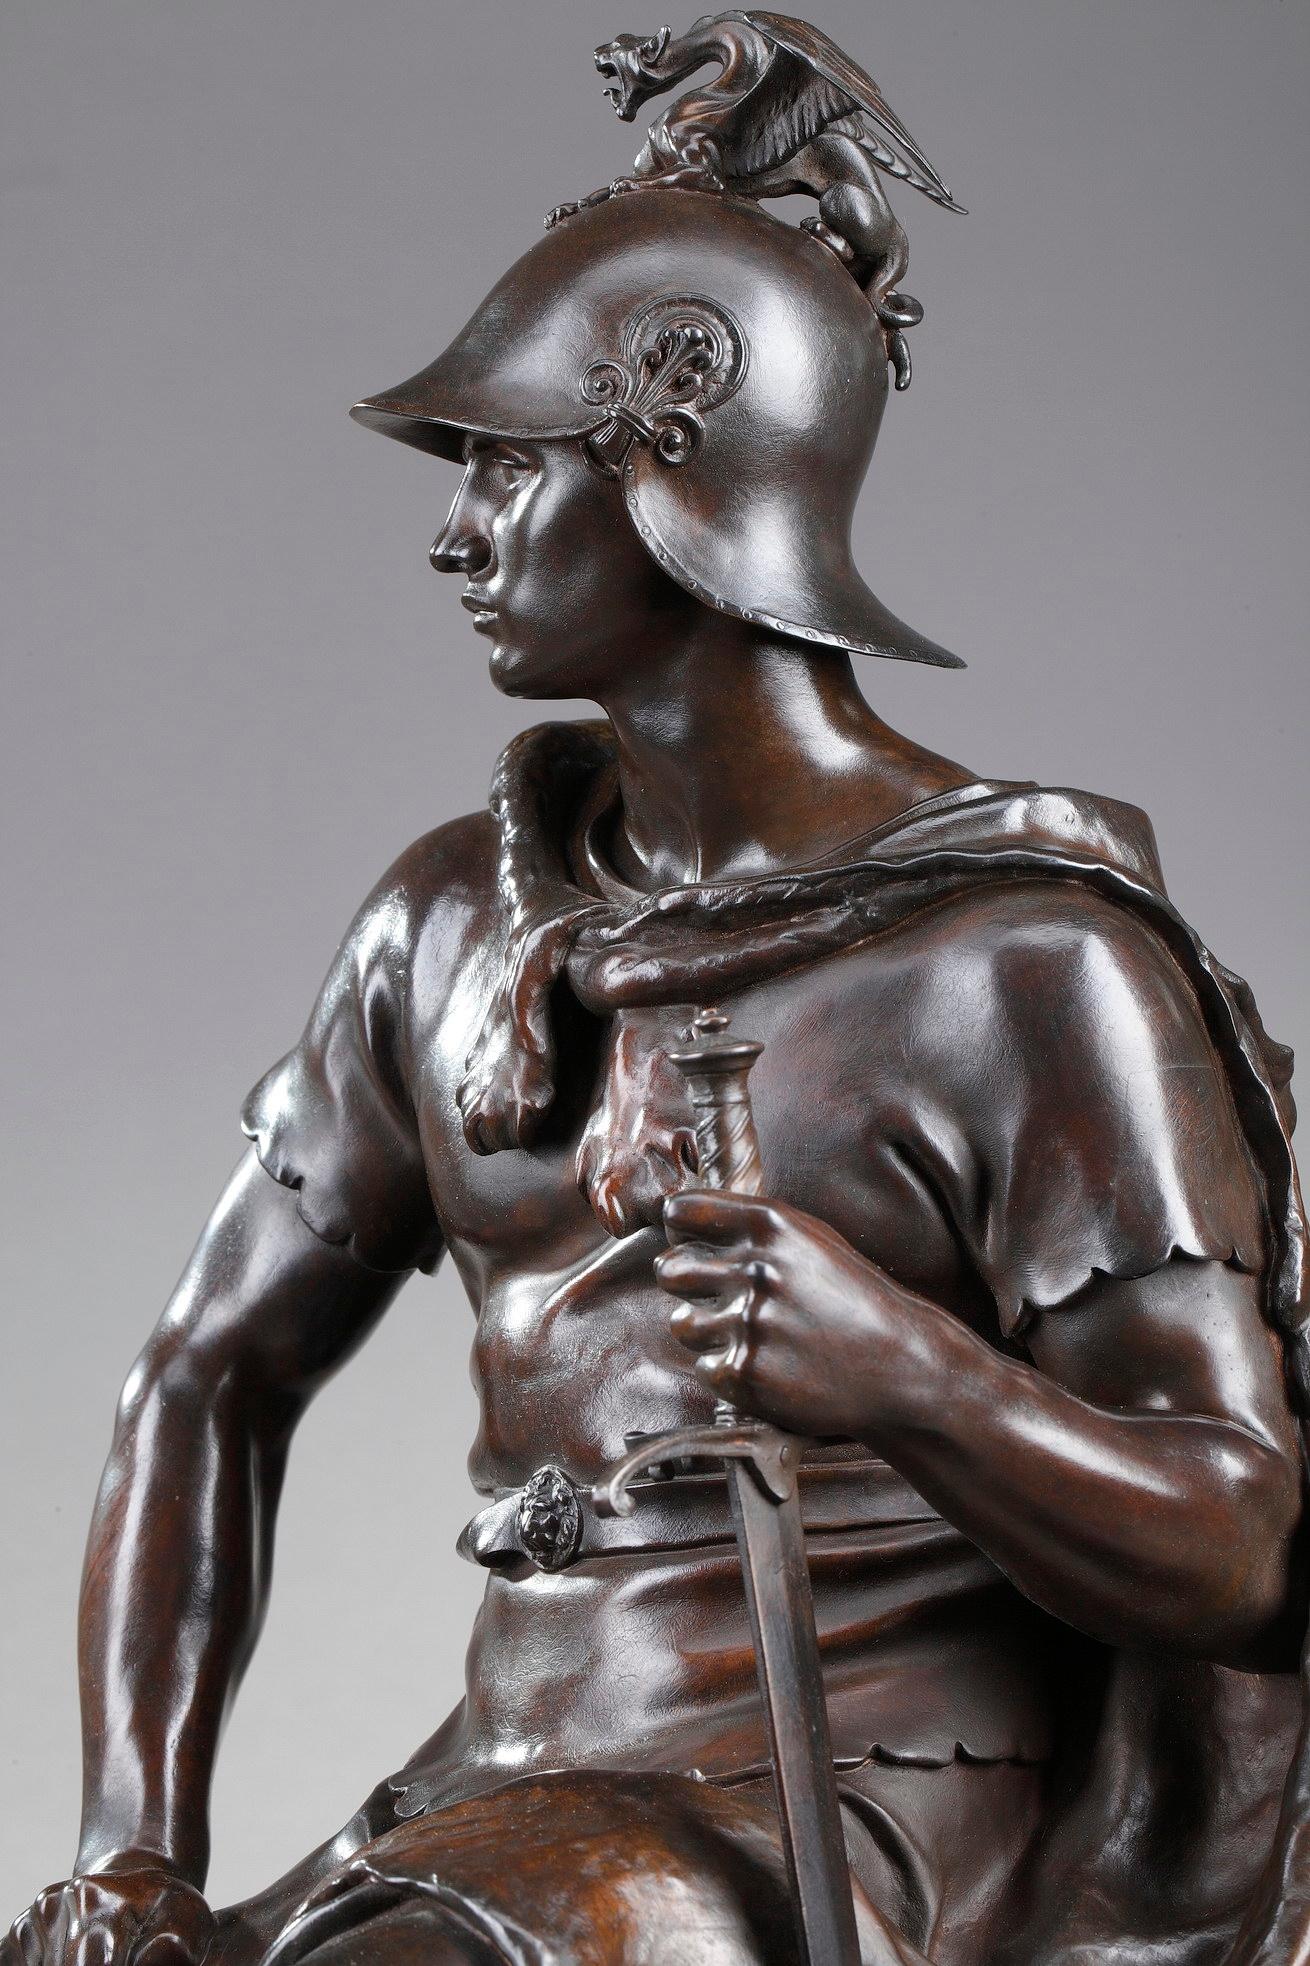 Patinated Paul Dubois Le Courage Militaire, Founder Barbedienne